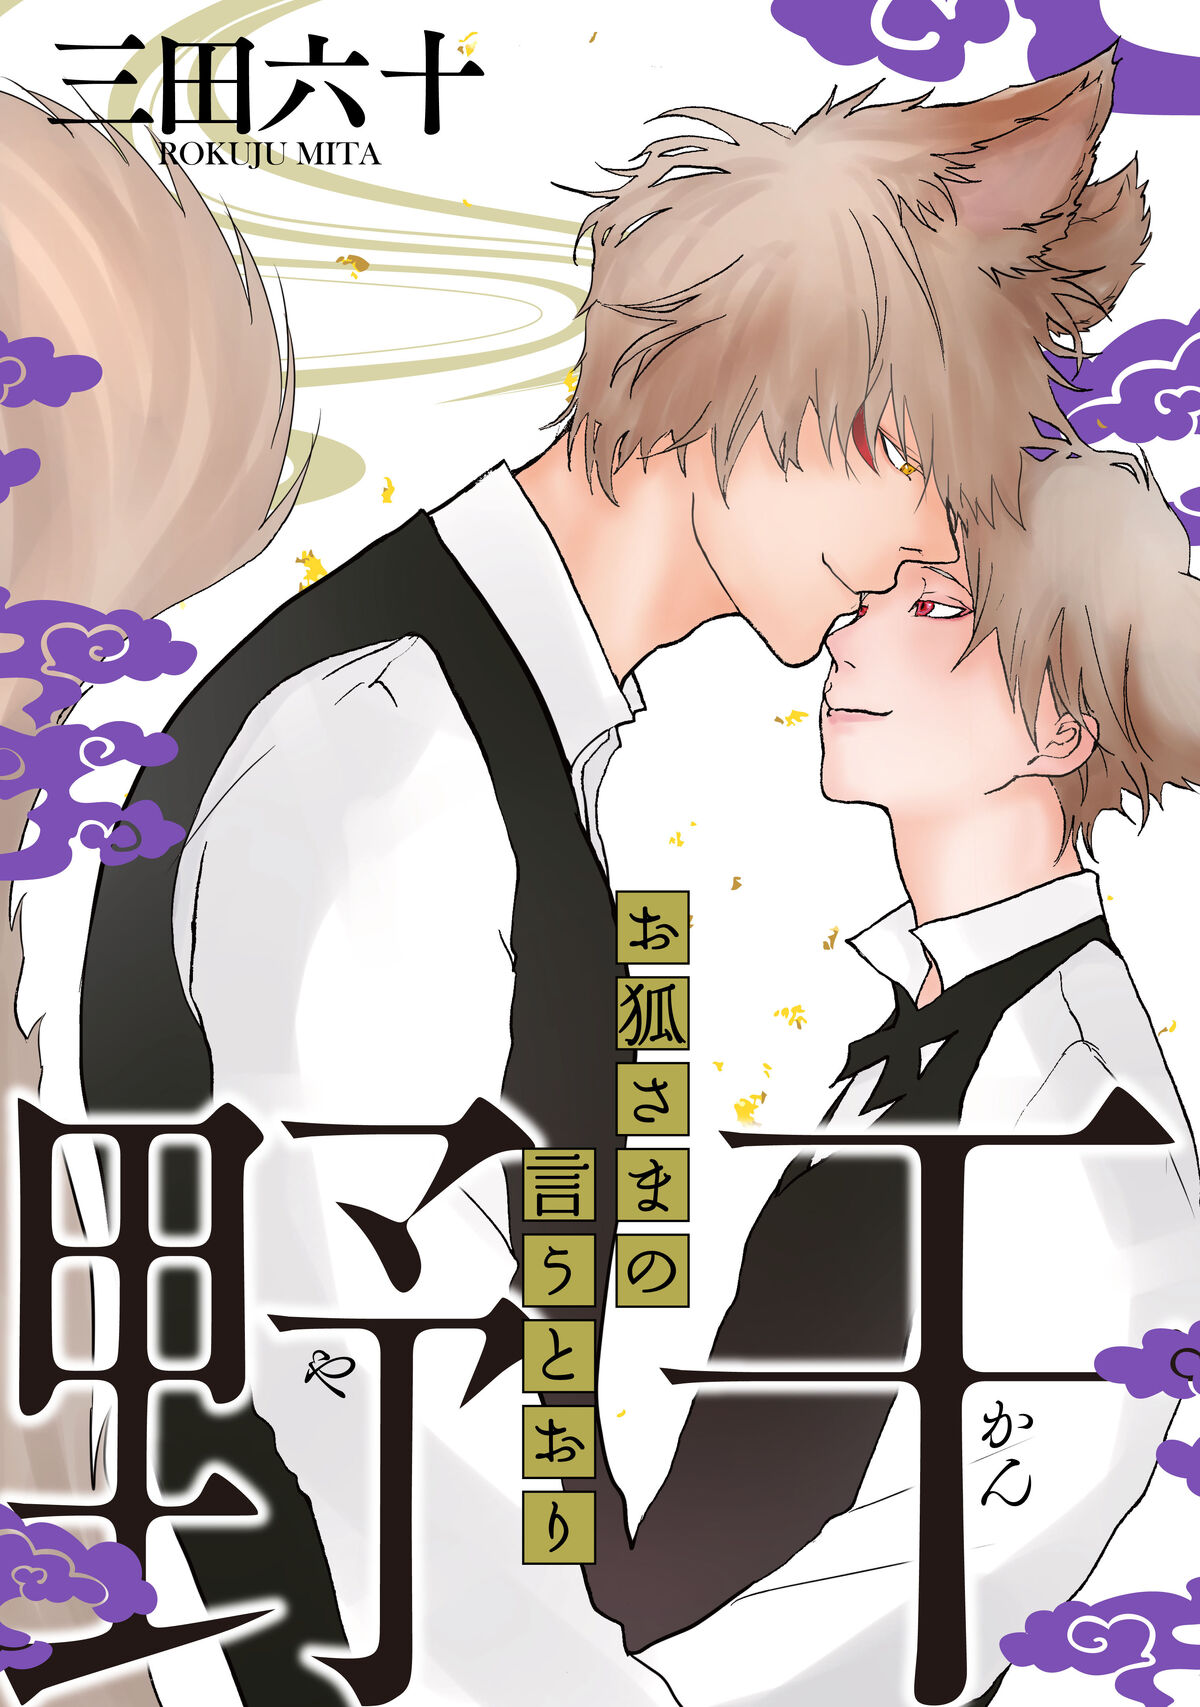 Kimi to Boku' Manga Ends With Side Story Chapters Scheduled